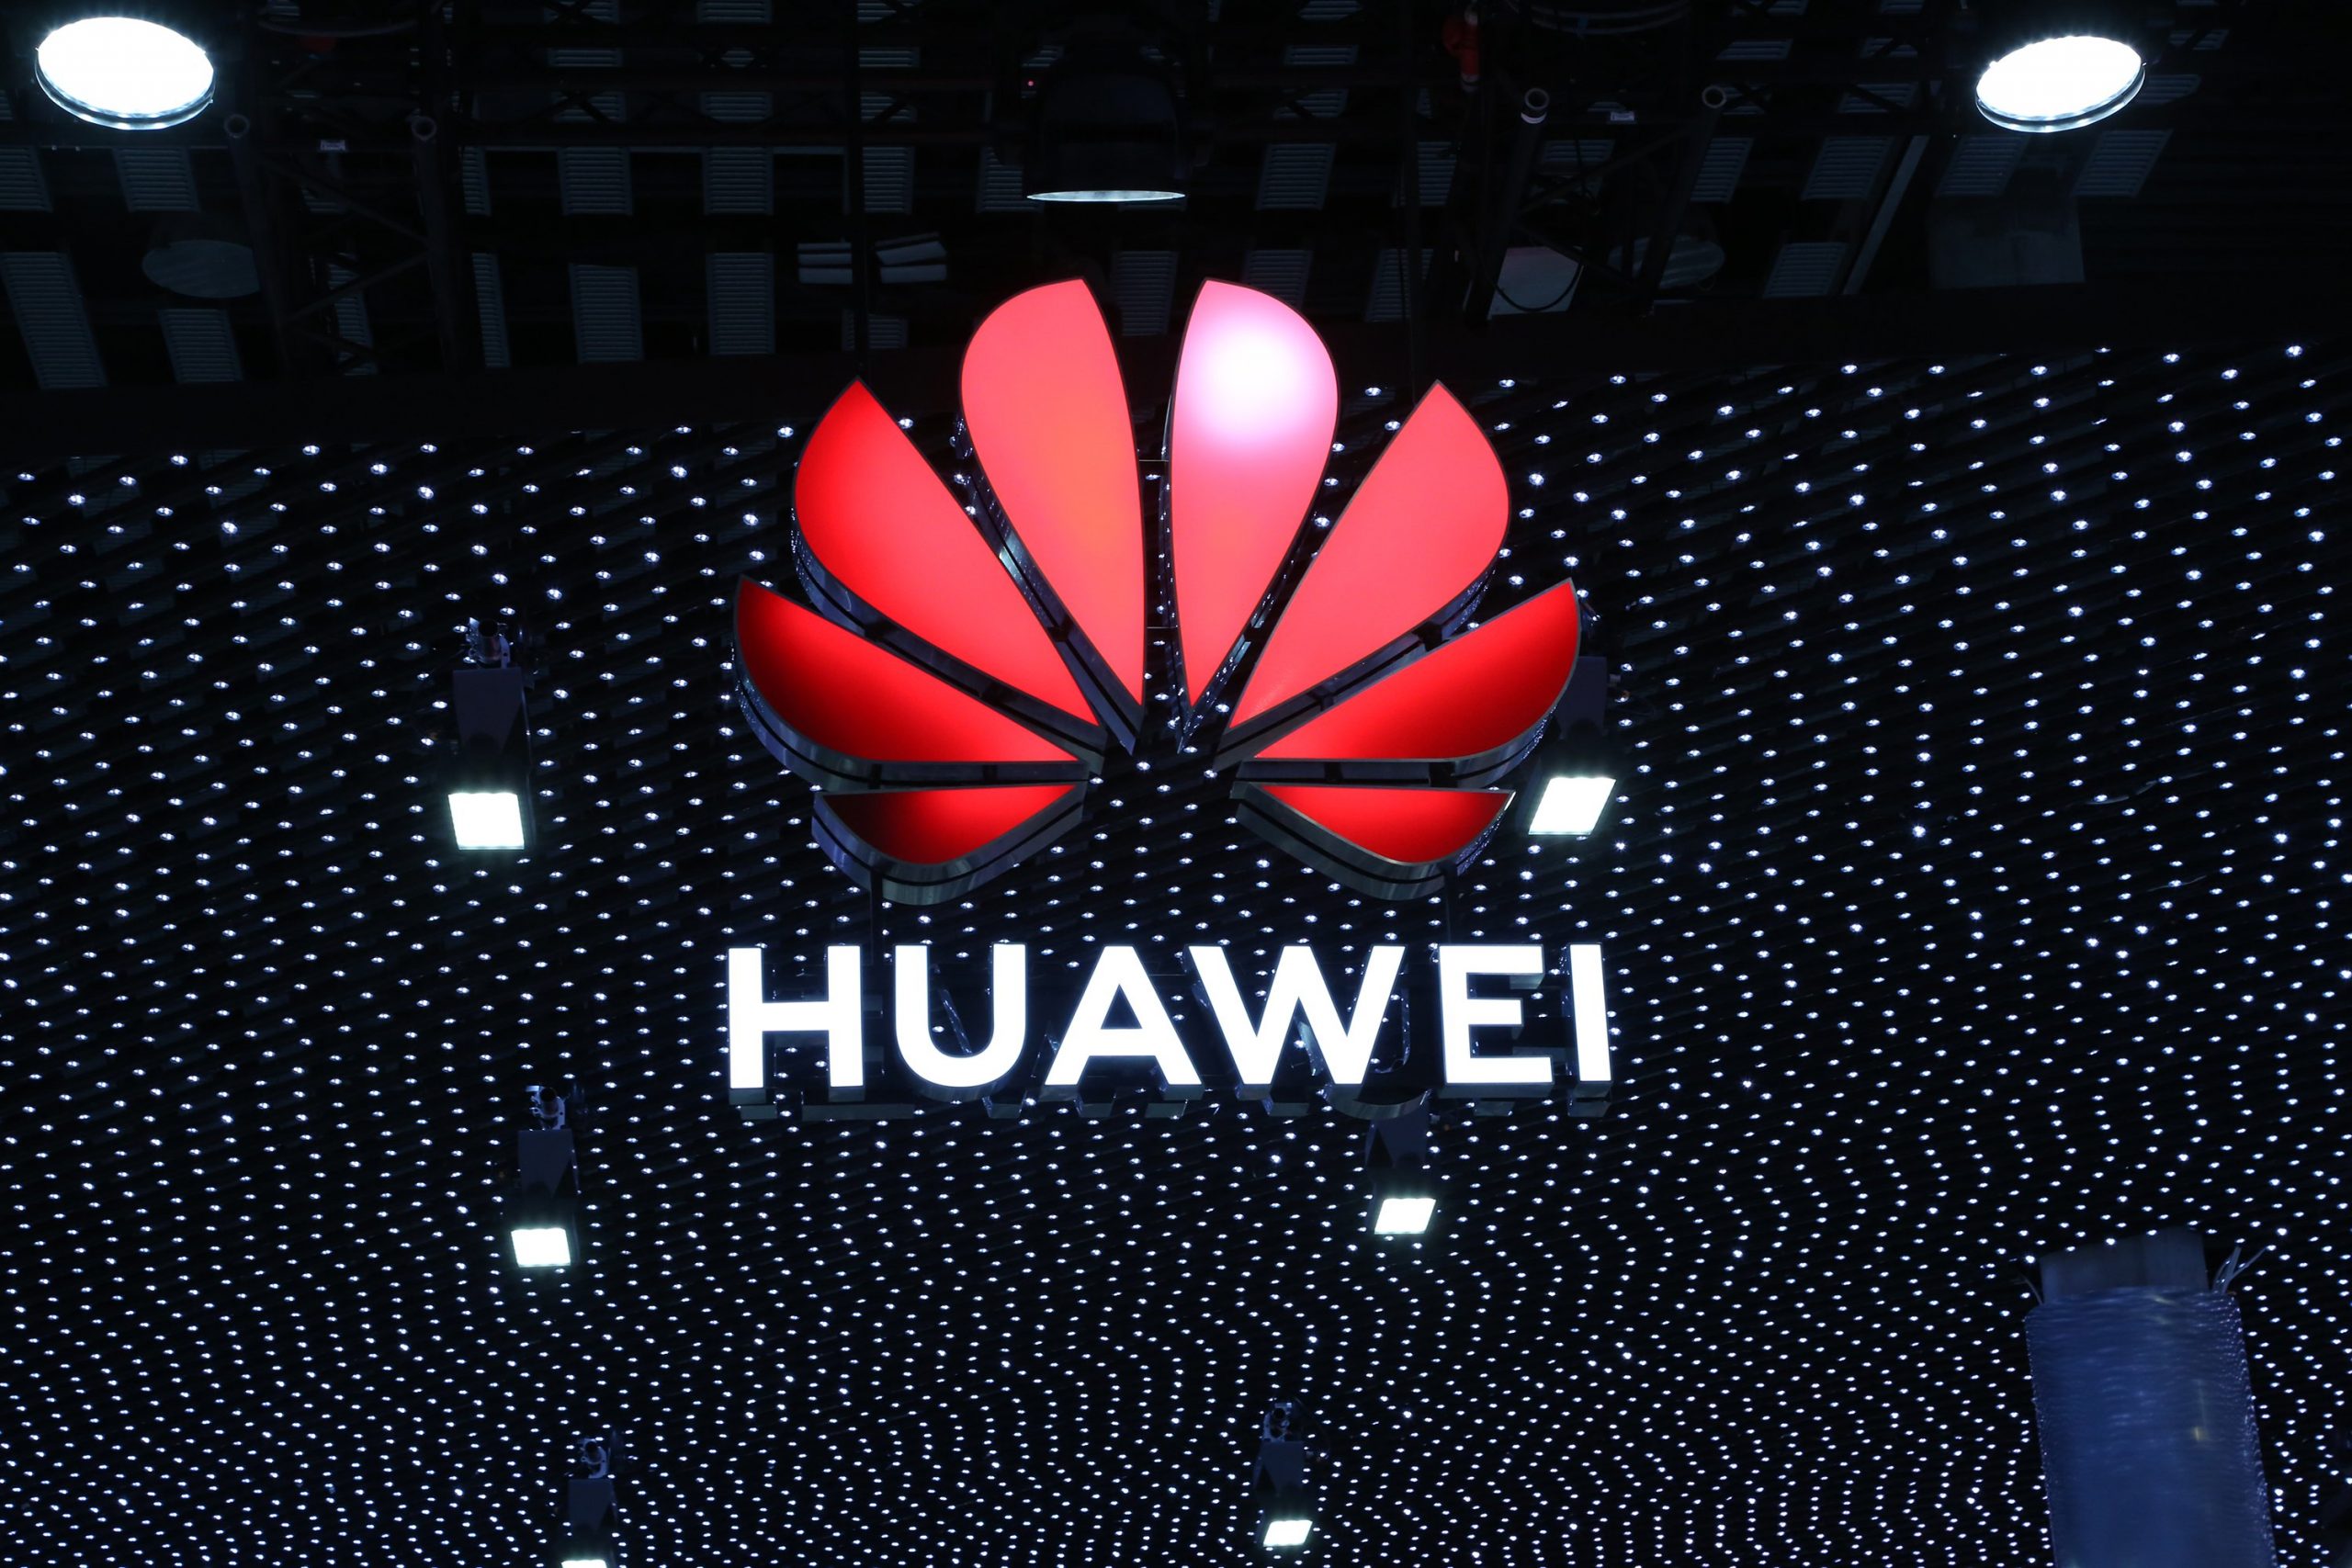 United States to spend $1.9 billion for replacing Huawei and ZTE equipment